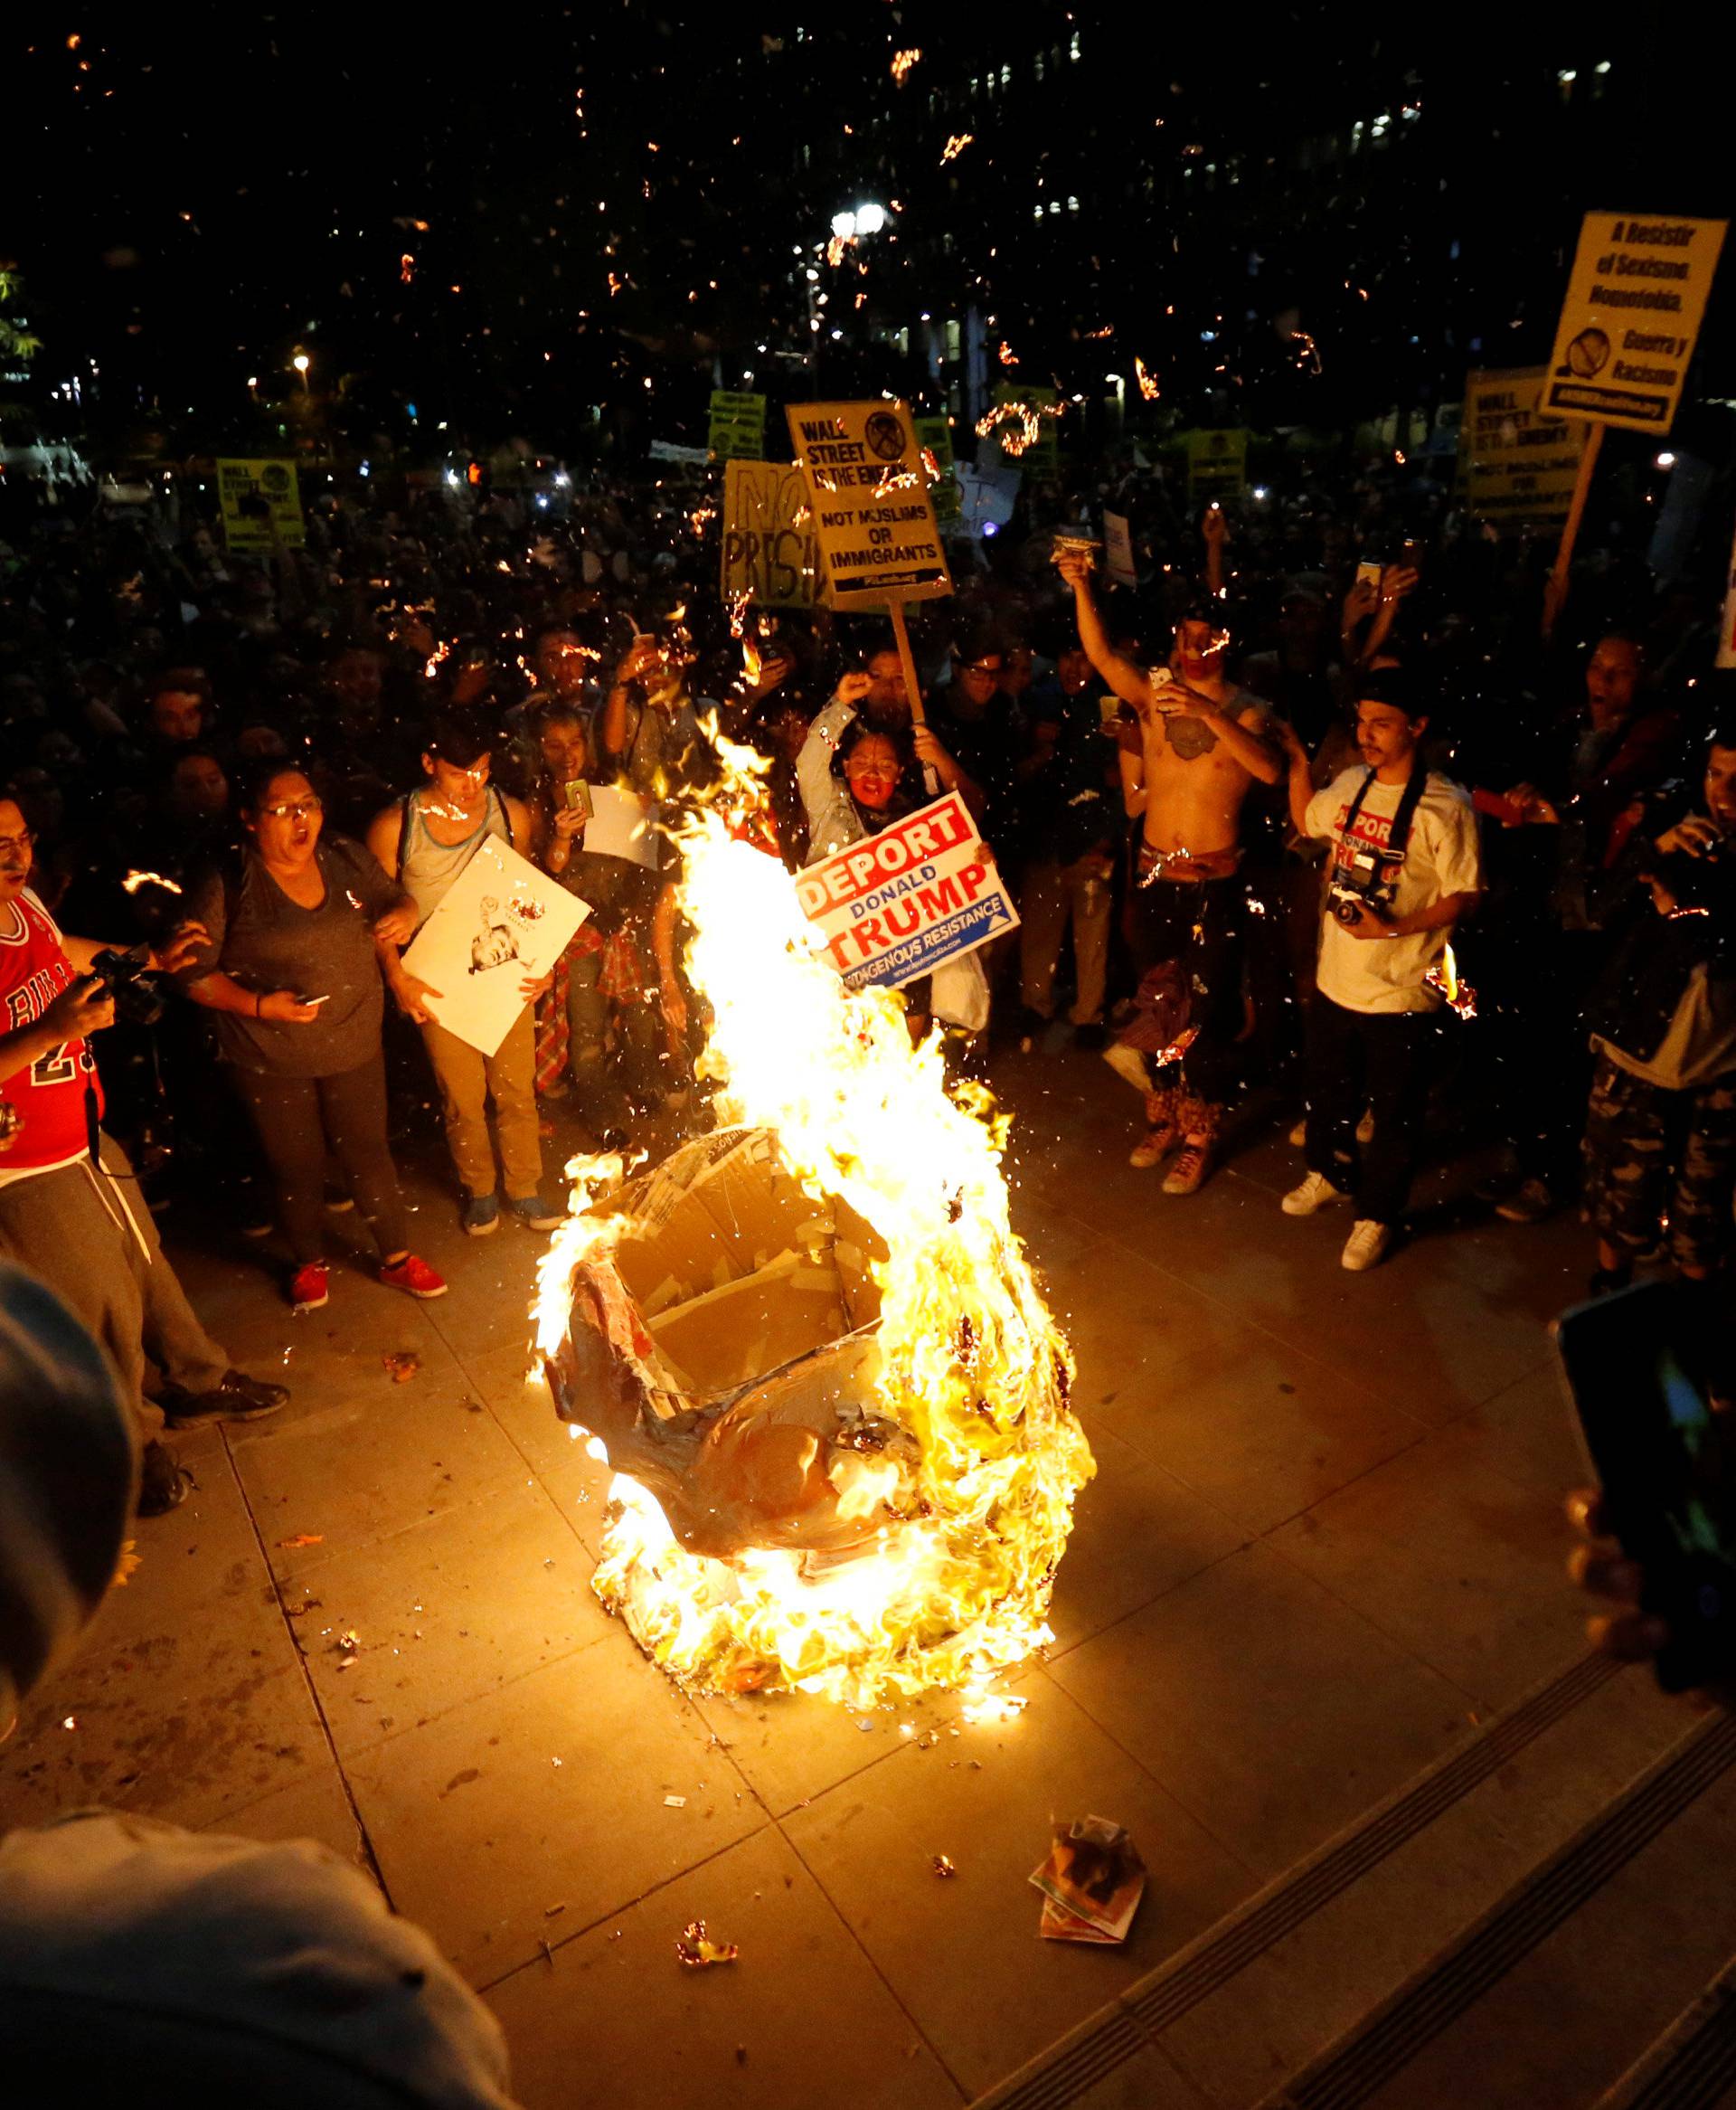 A Donald Trump pinata is burned by people protesting the election of Republican Donald Trump as the president of the United States in downtown Los Angeles